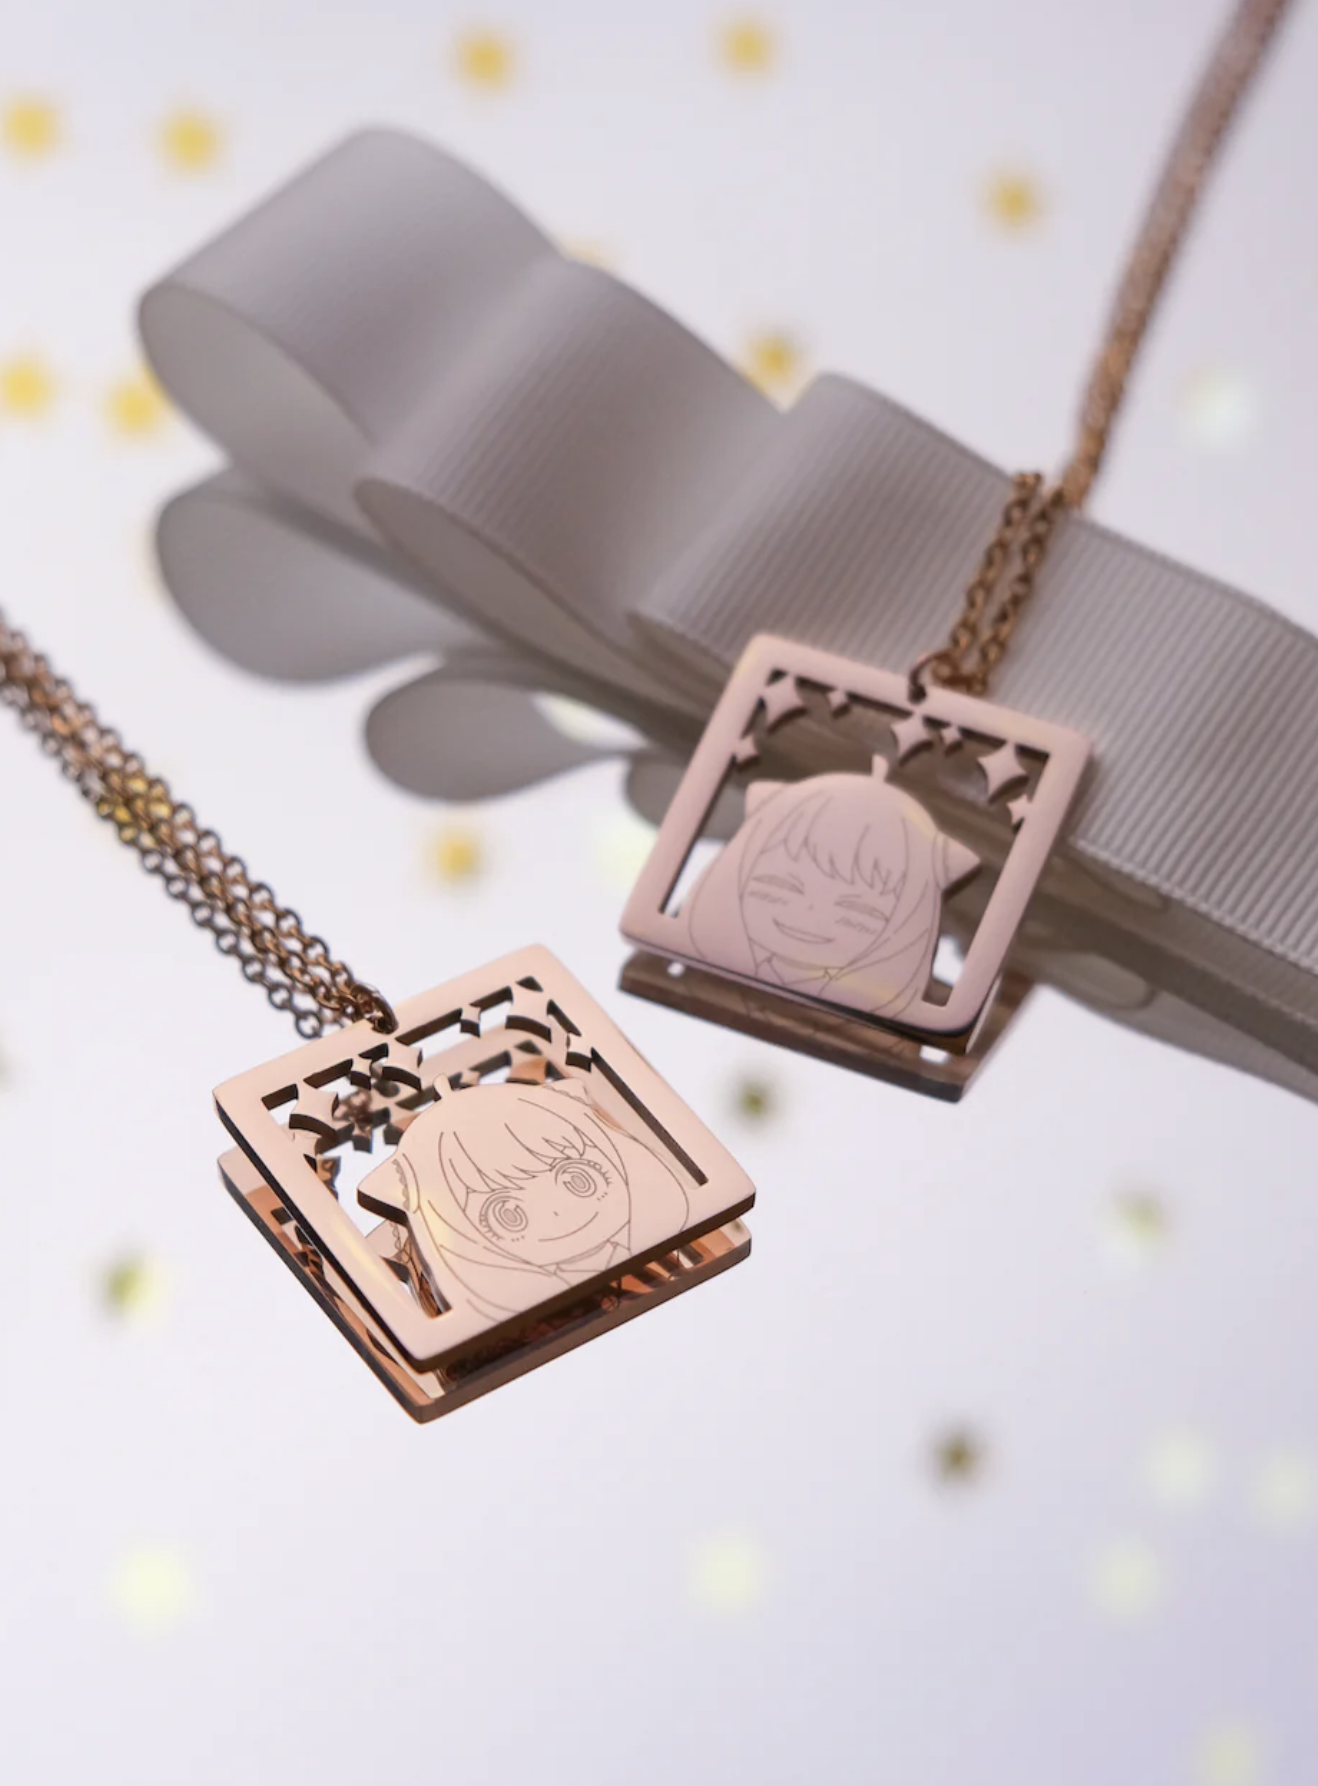 Two layered square necklaces with intricate etching, displayed against a soft backdrop